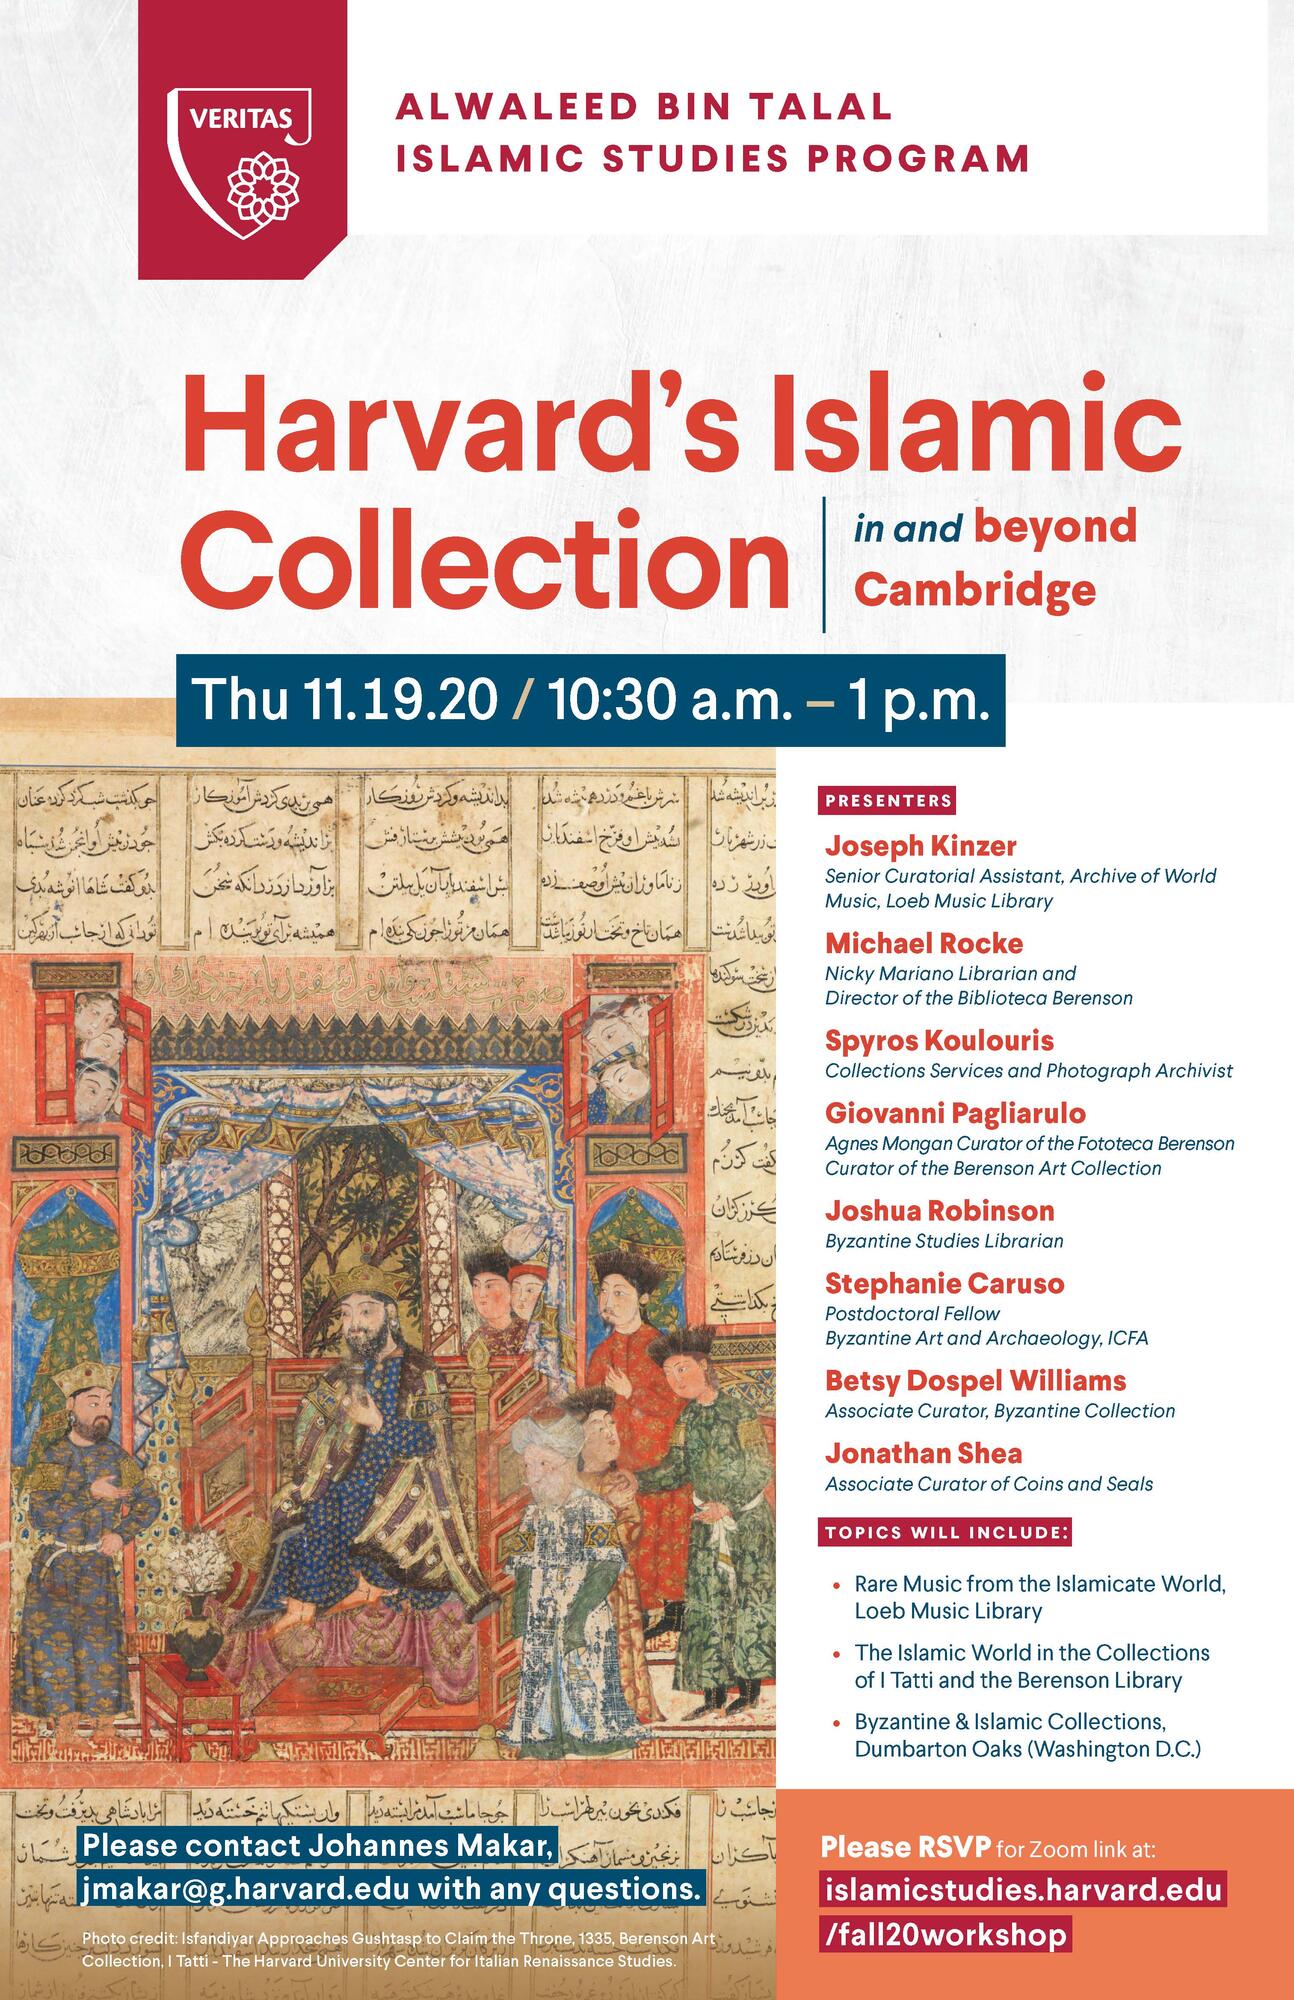 Harvard Islamic Collection in and beyond Cambridge